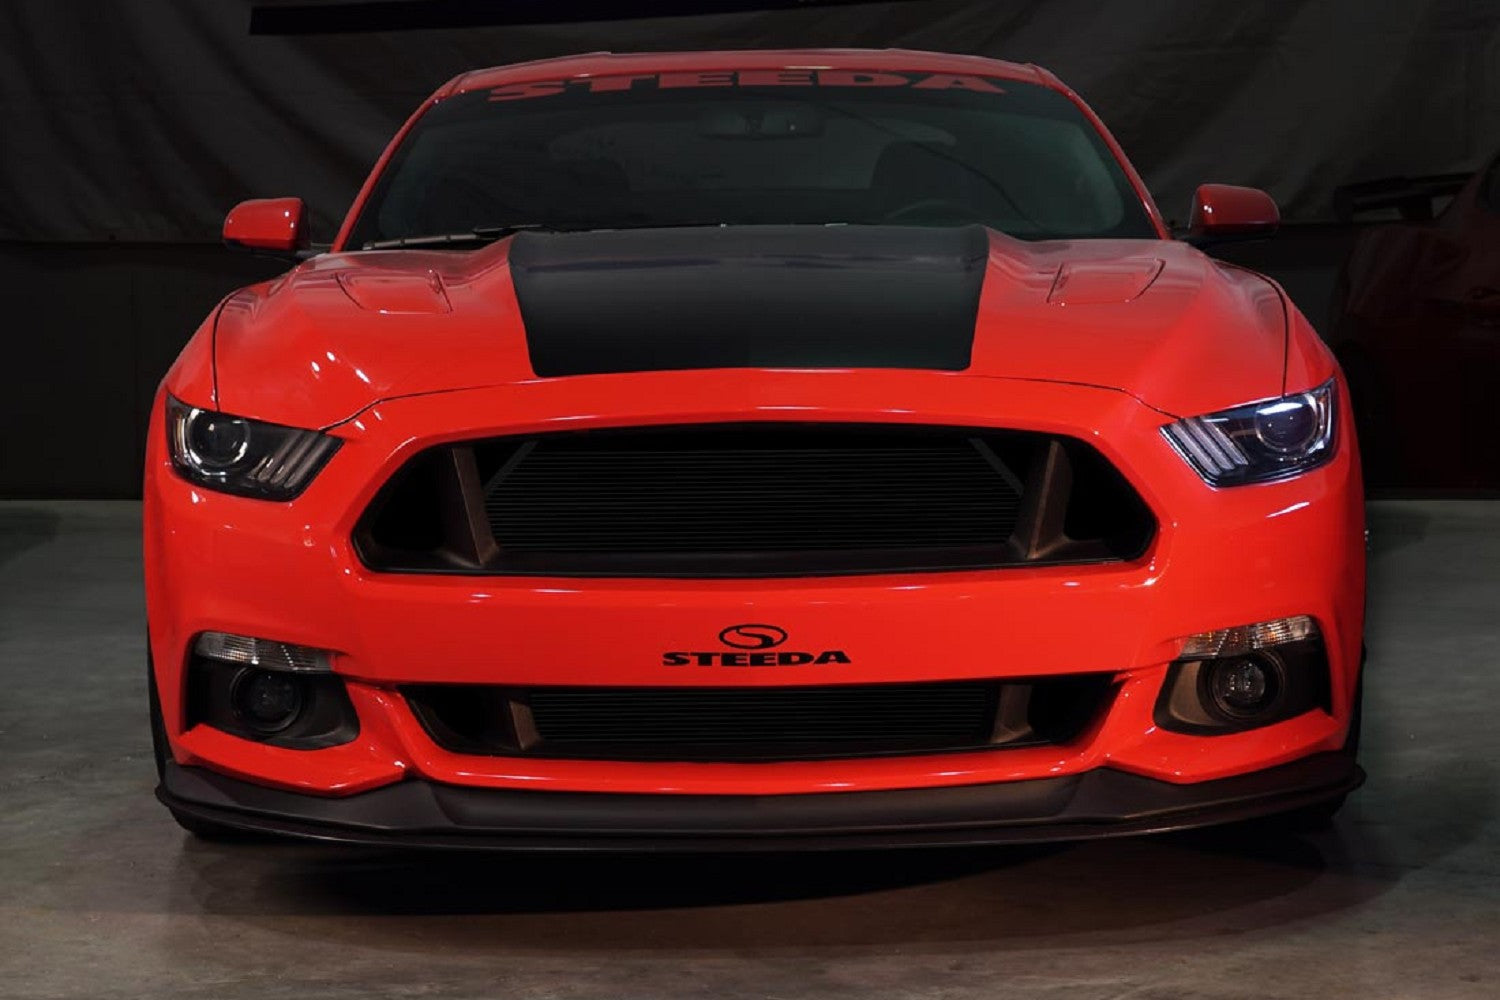 Exclusões do S550 Mustang Grill